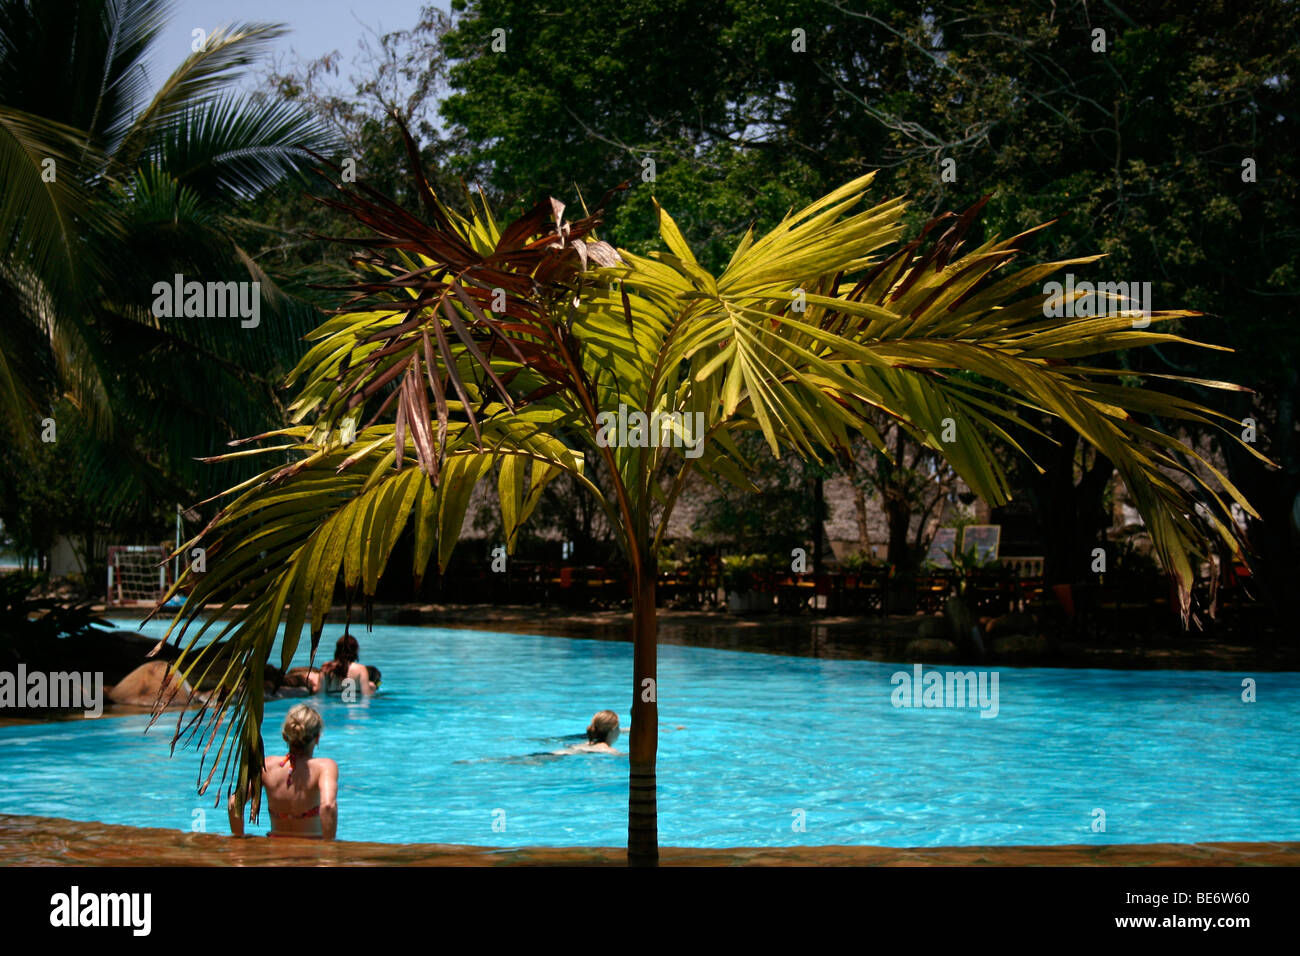 Plant in front of Swimming pool, Papillon Lagoon reef Hotel, Diani Beach, Mombasa, Kenya, Africa Stock Photo